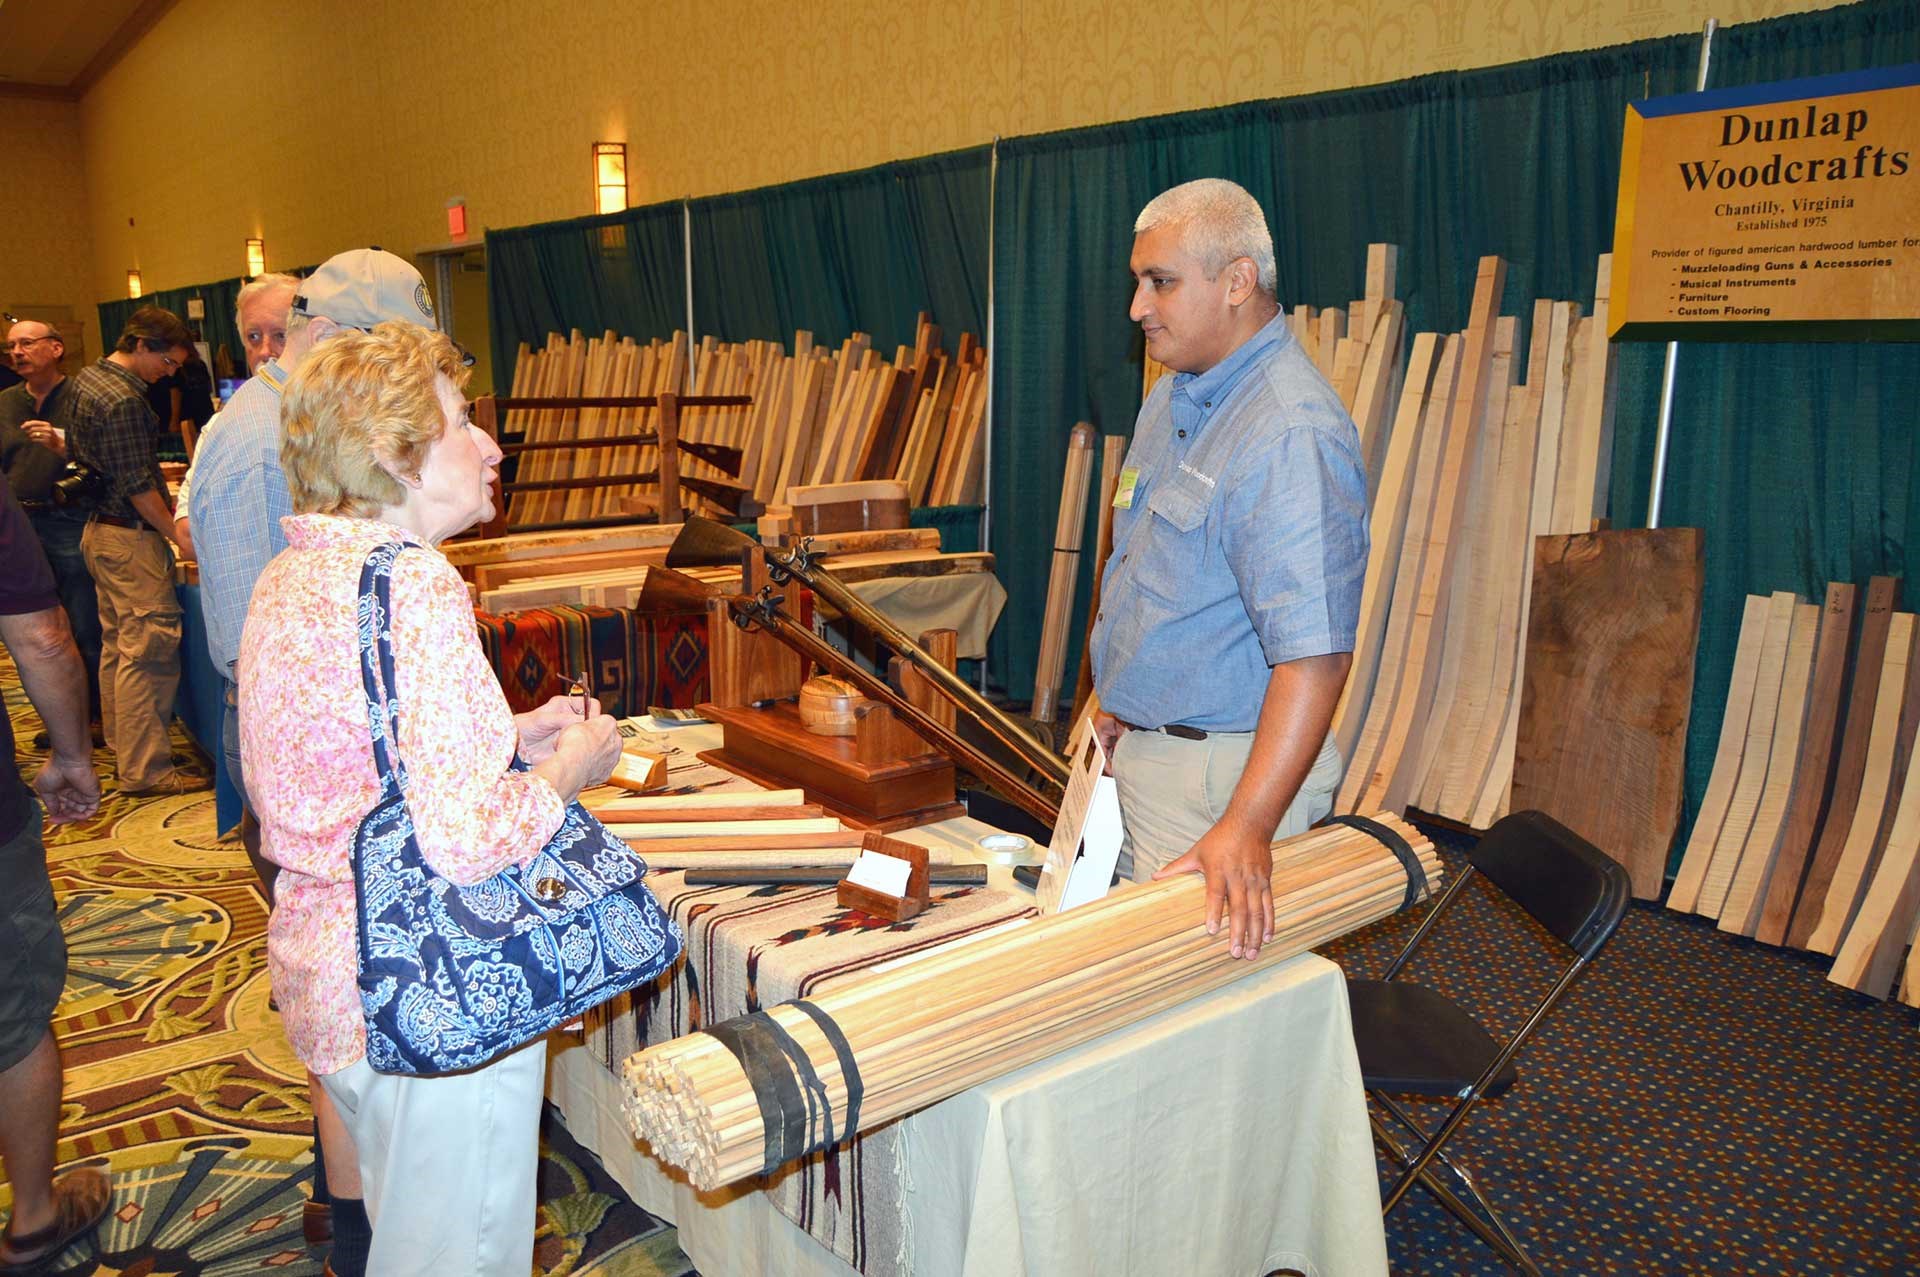 A pile of unfinished rifle stocks lay against the back wall behind a vendor and a woman talking at the CLA Show.